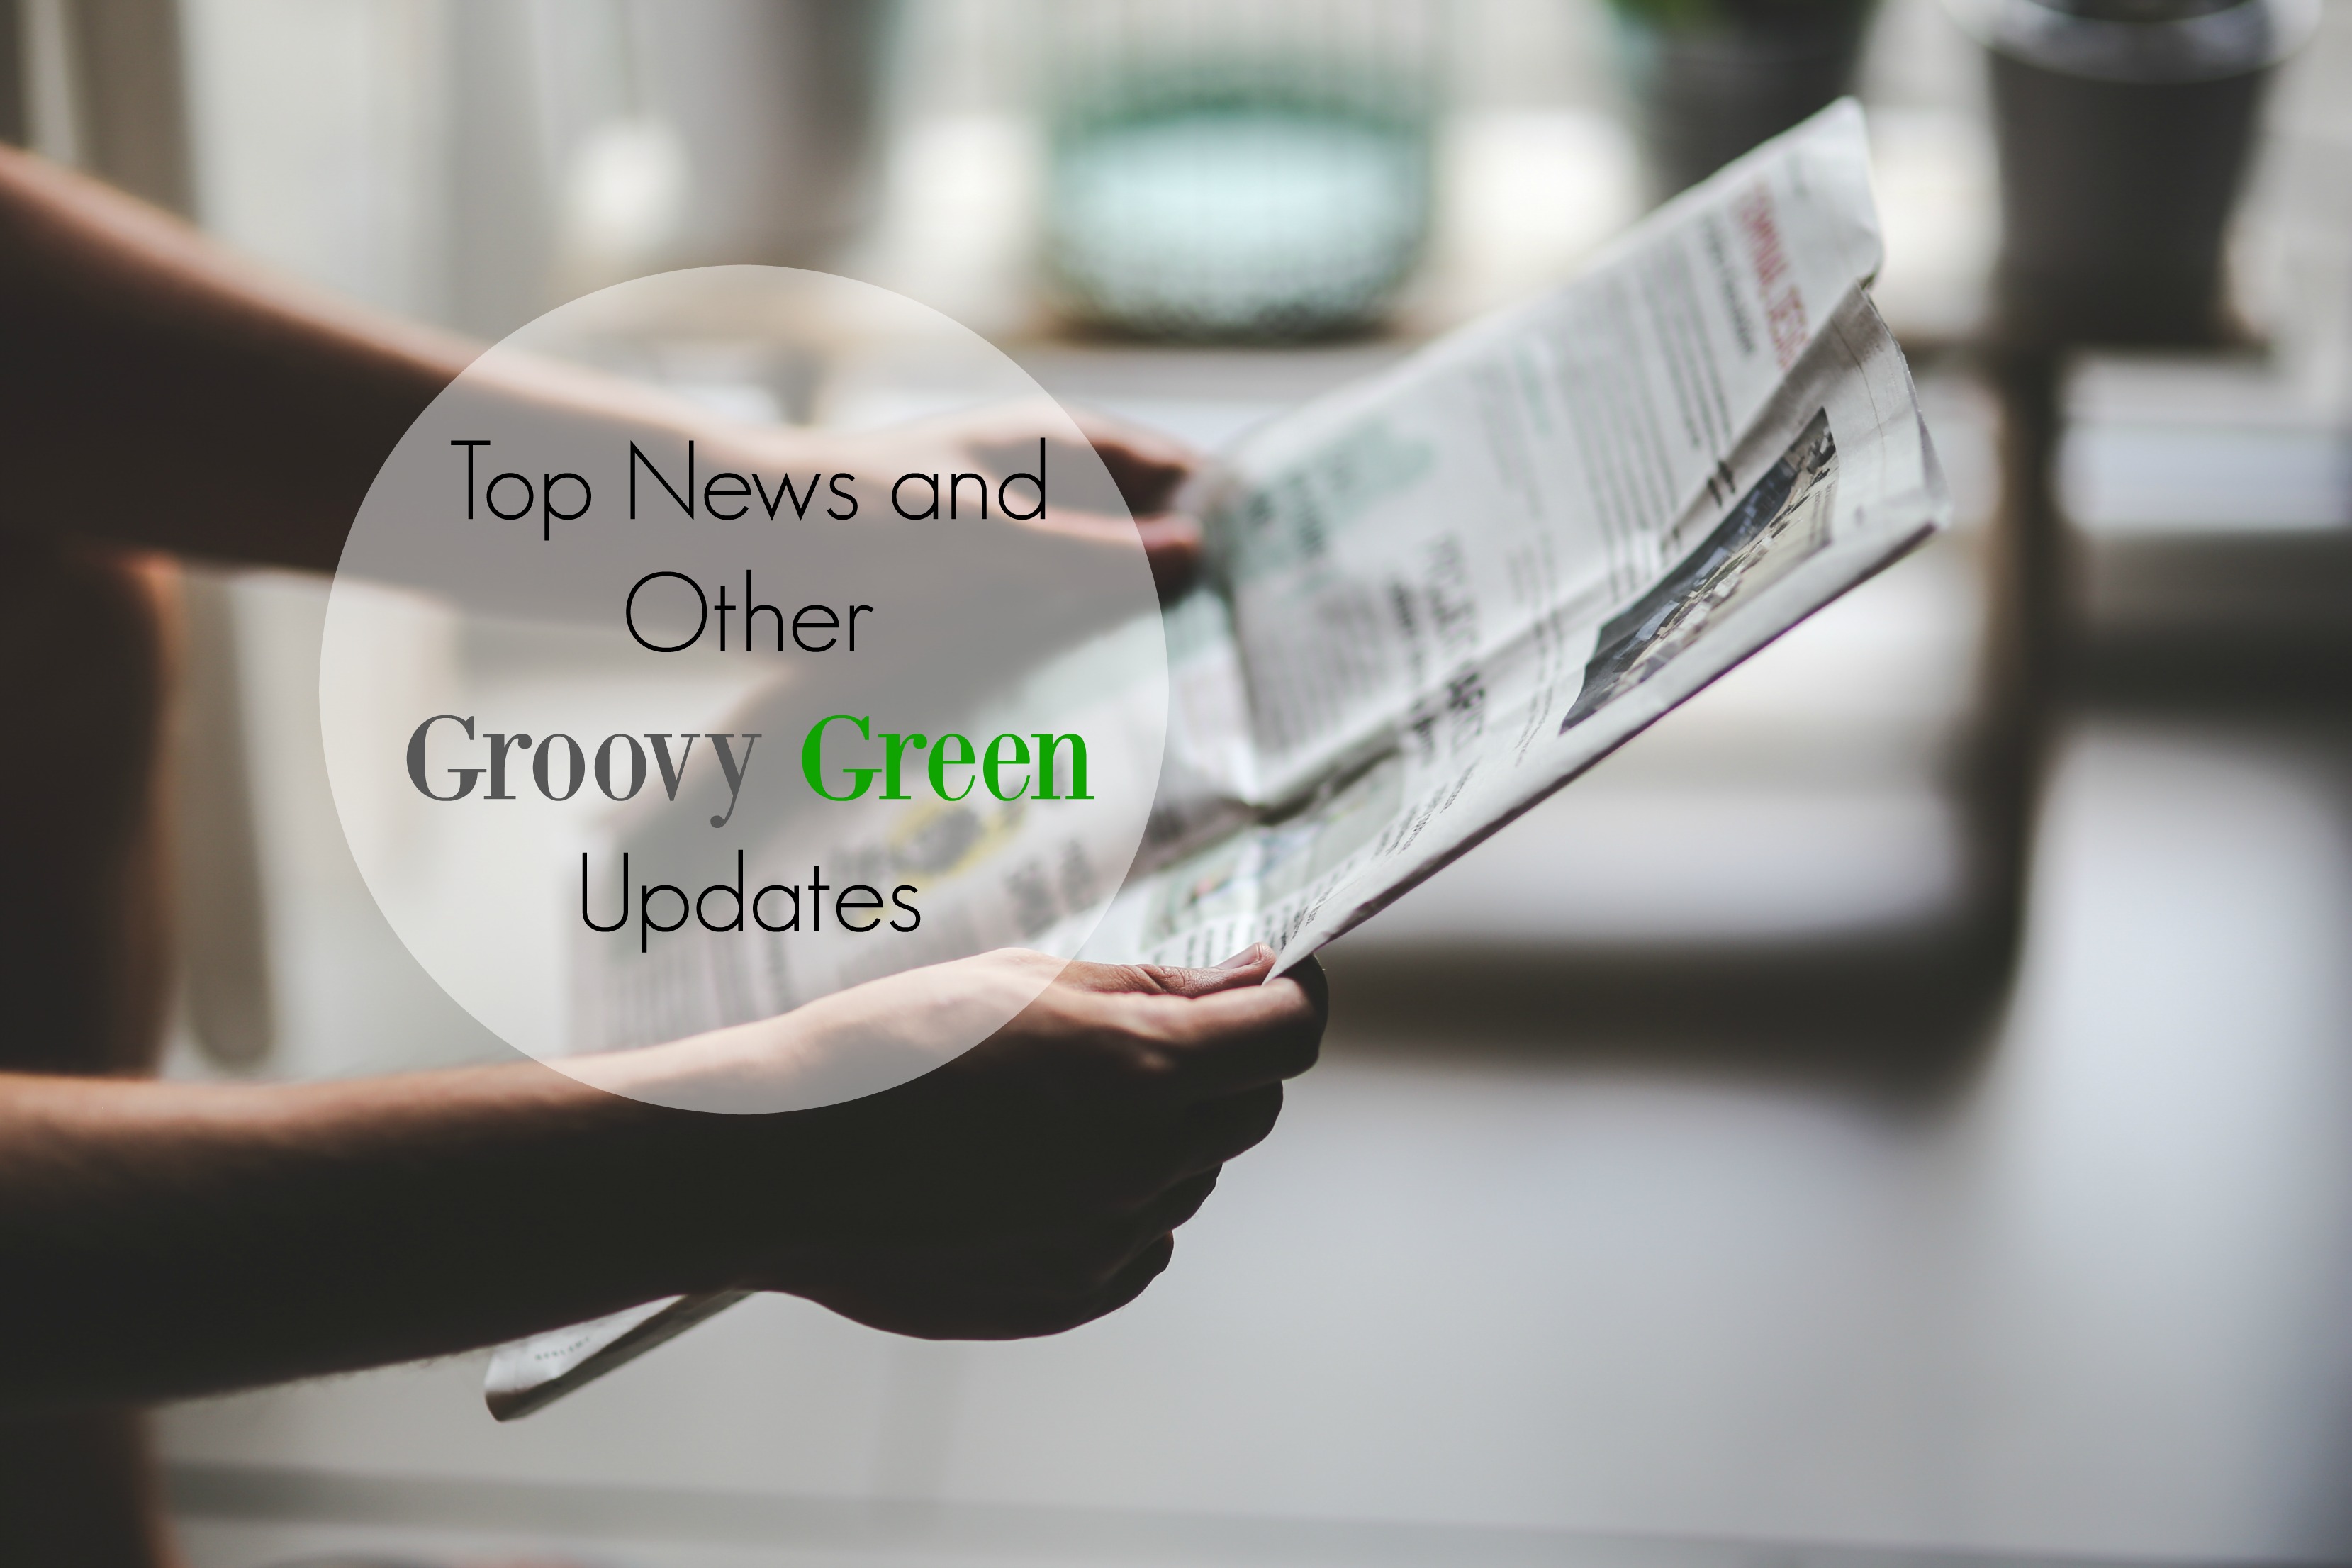 Top News and Other Groovy Green Updates